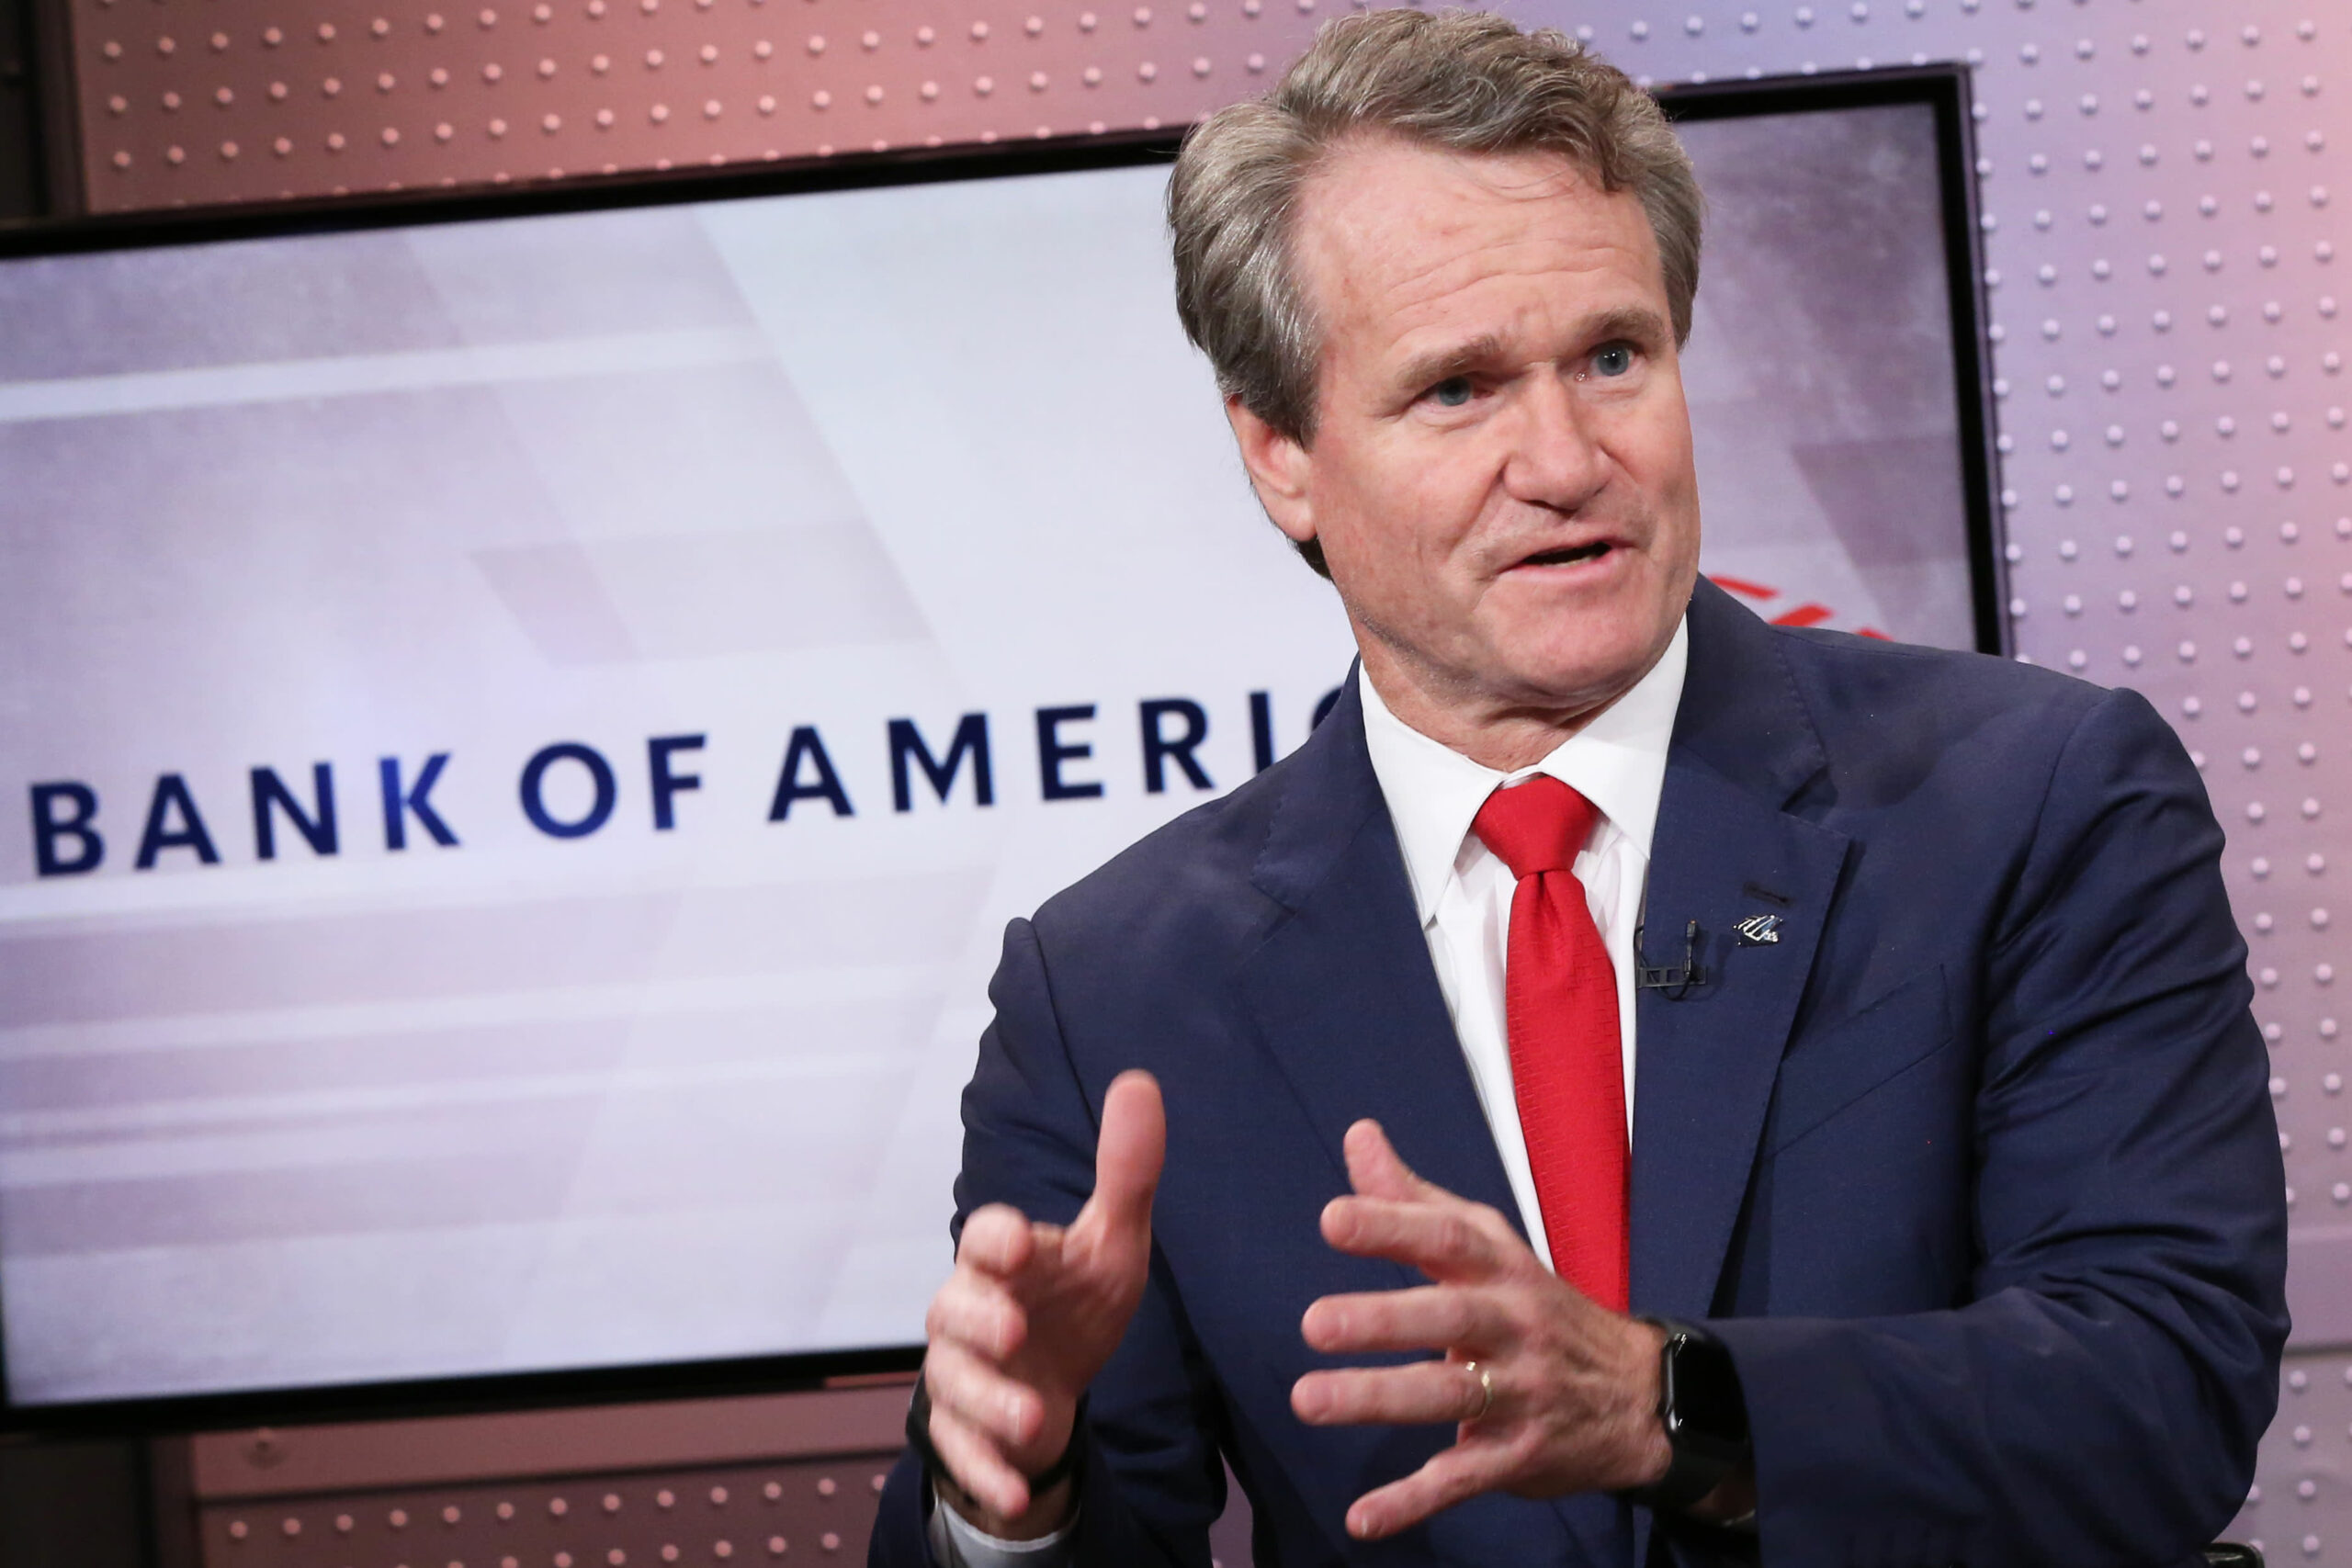 Bank of America CEO Brian Moynihan, Credit to CNBC